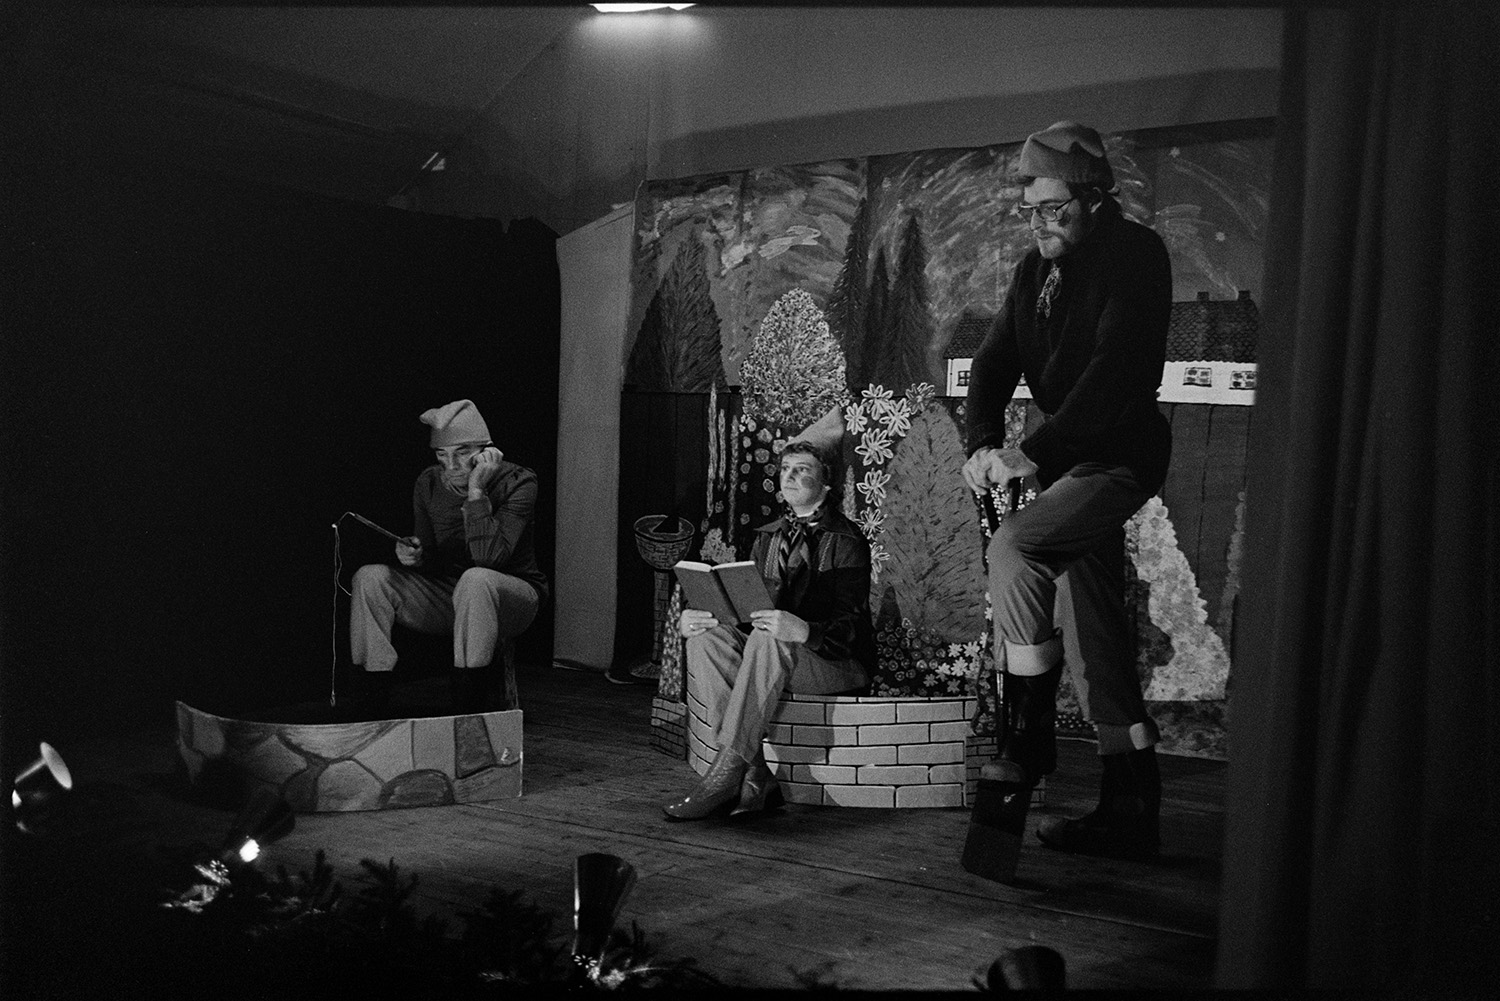 Christmas entertainment in village hall, singing and dance, short plays.
[Three people dressed as gnomes on stage at High Bickington village hall. They are performing a short play for Christmas entertainment. One is fishing, one is reading a book and the other is digging with a spade.]